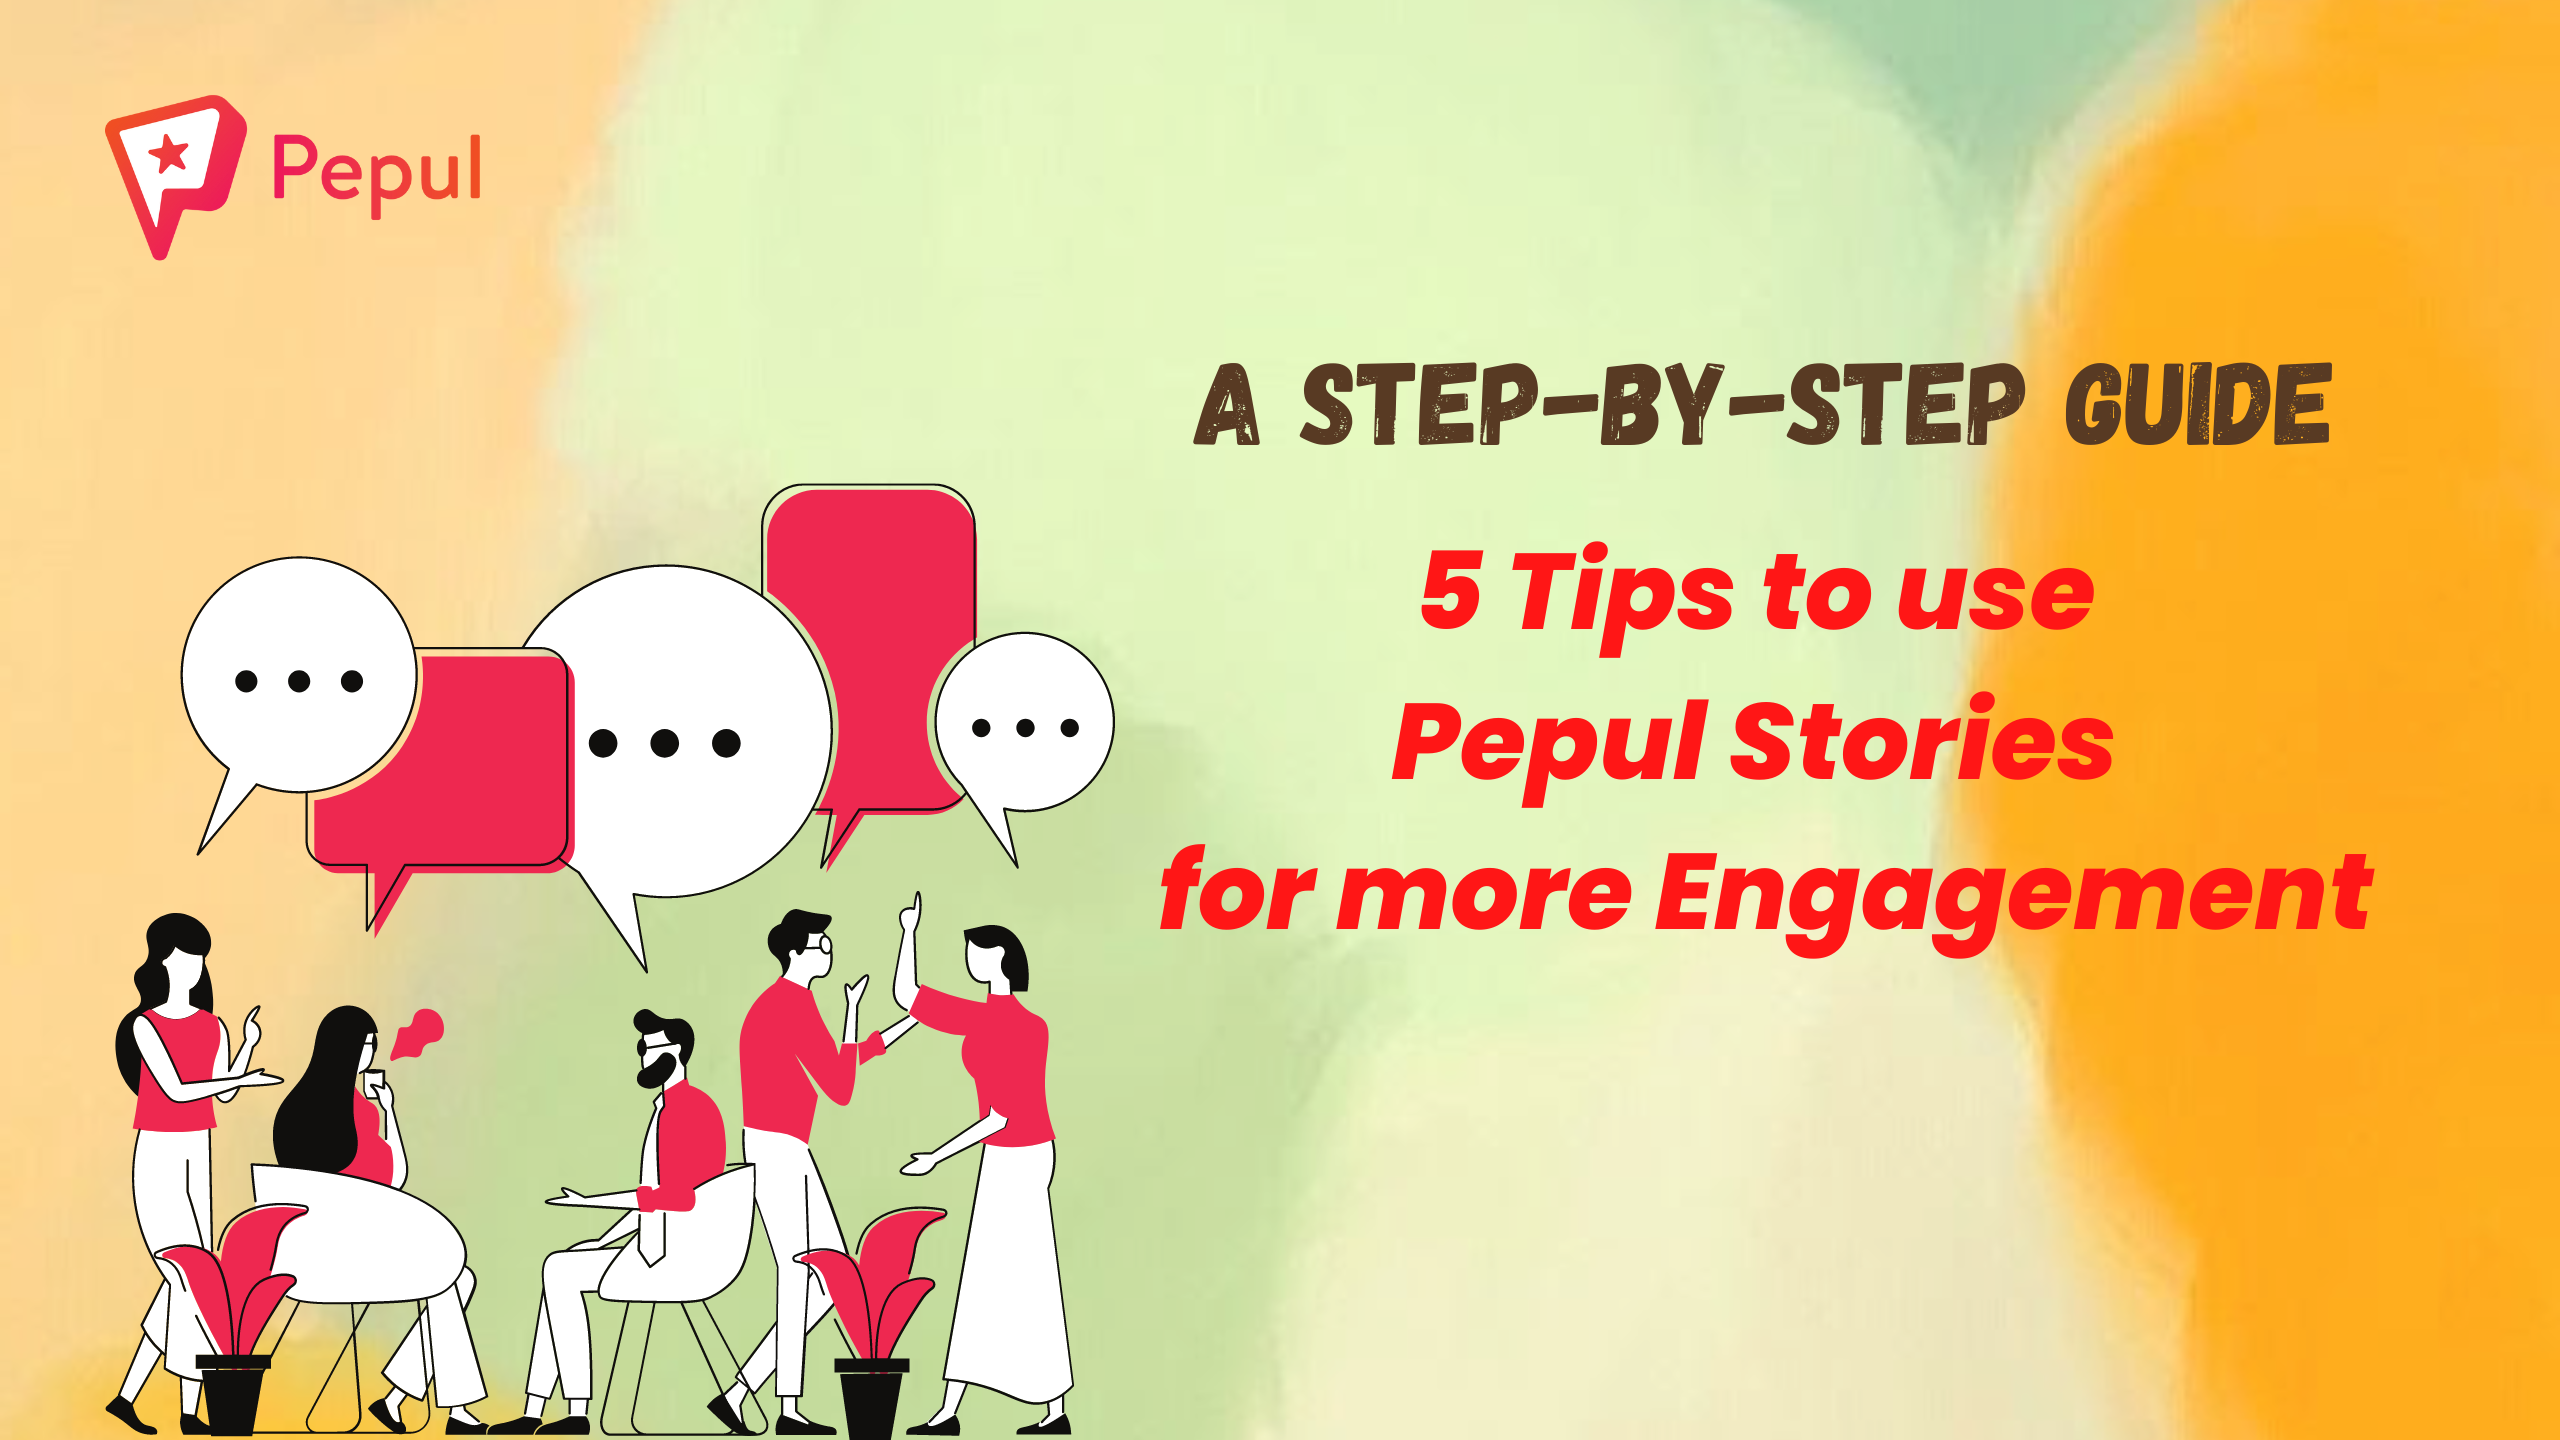 A Step-By-Step Guide: 5 Tips to Create and Use Pepul Stories for more Engagement